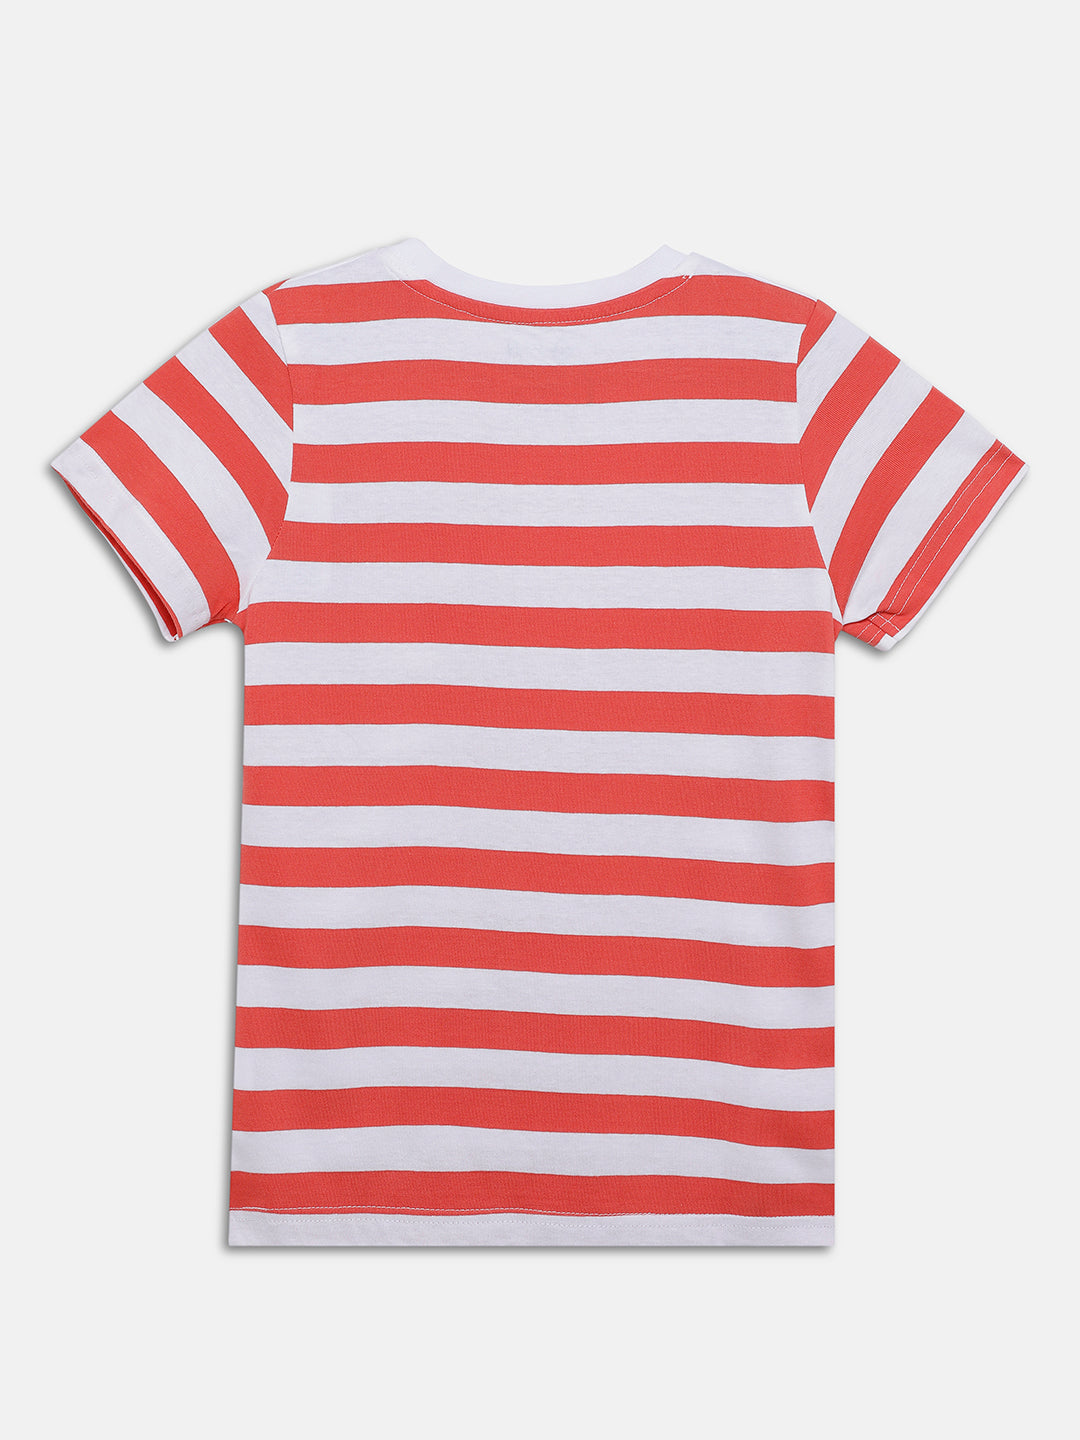 Pack of 2 Striped T-Shirt - Multicolor